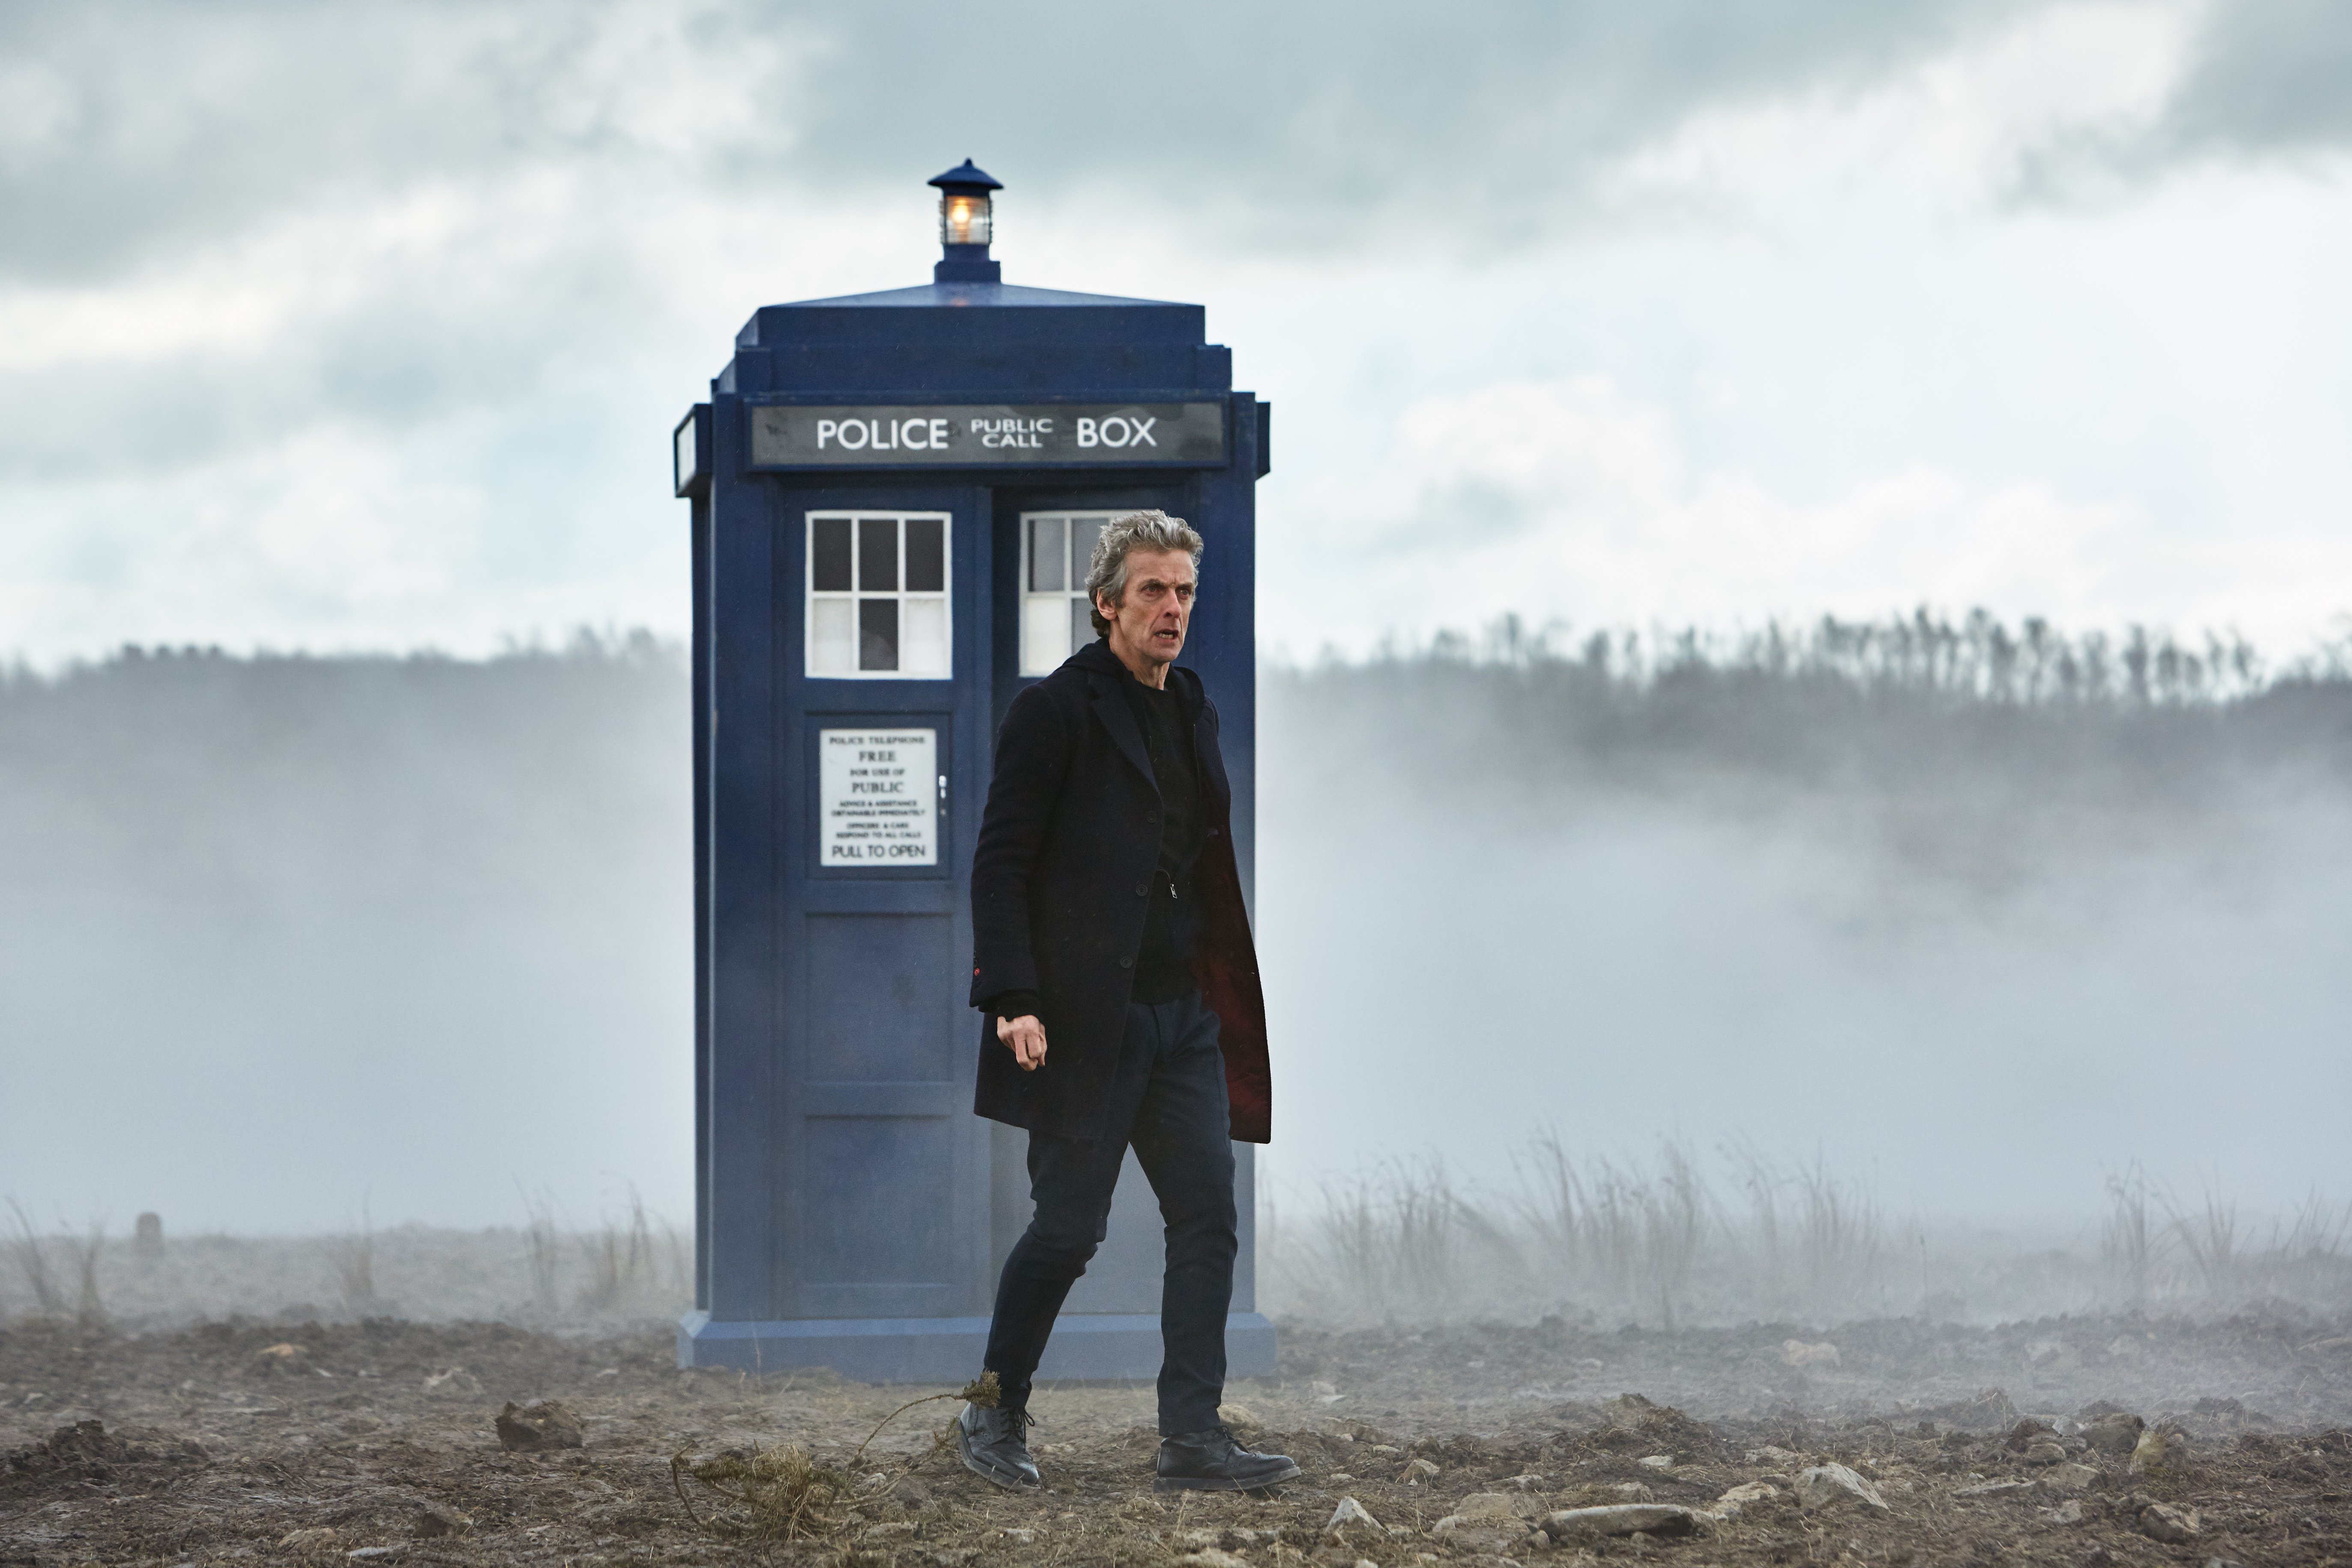 doctor who, tv show, 12th doctor, peter capaldi